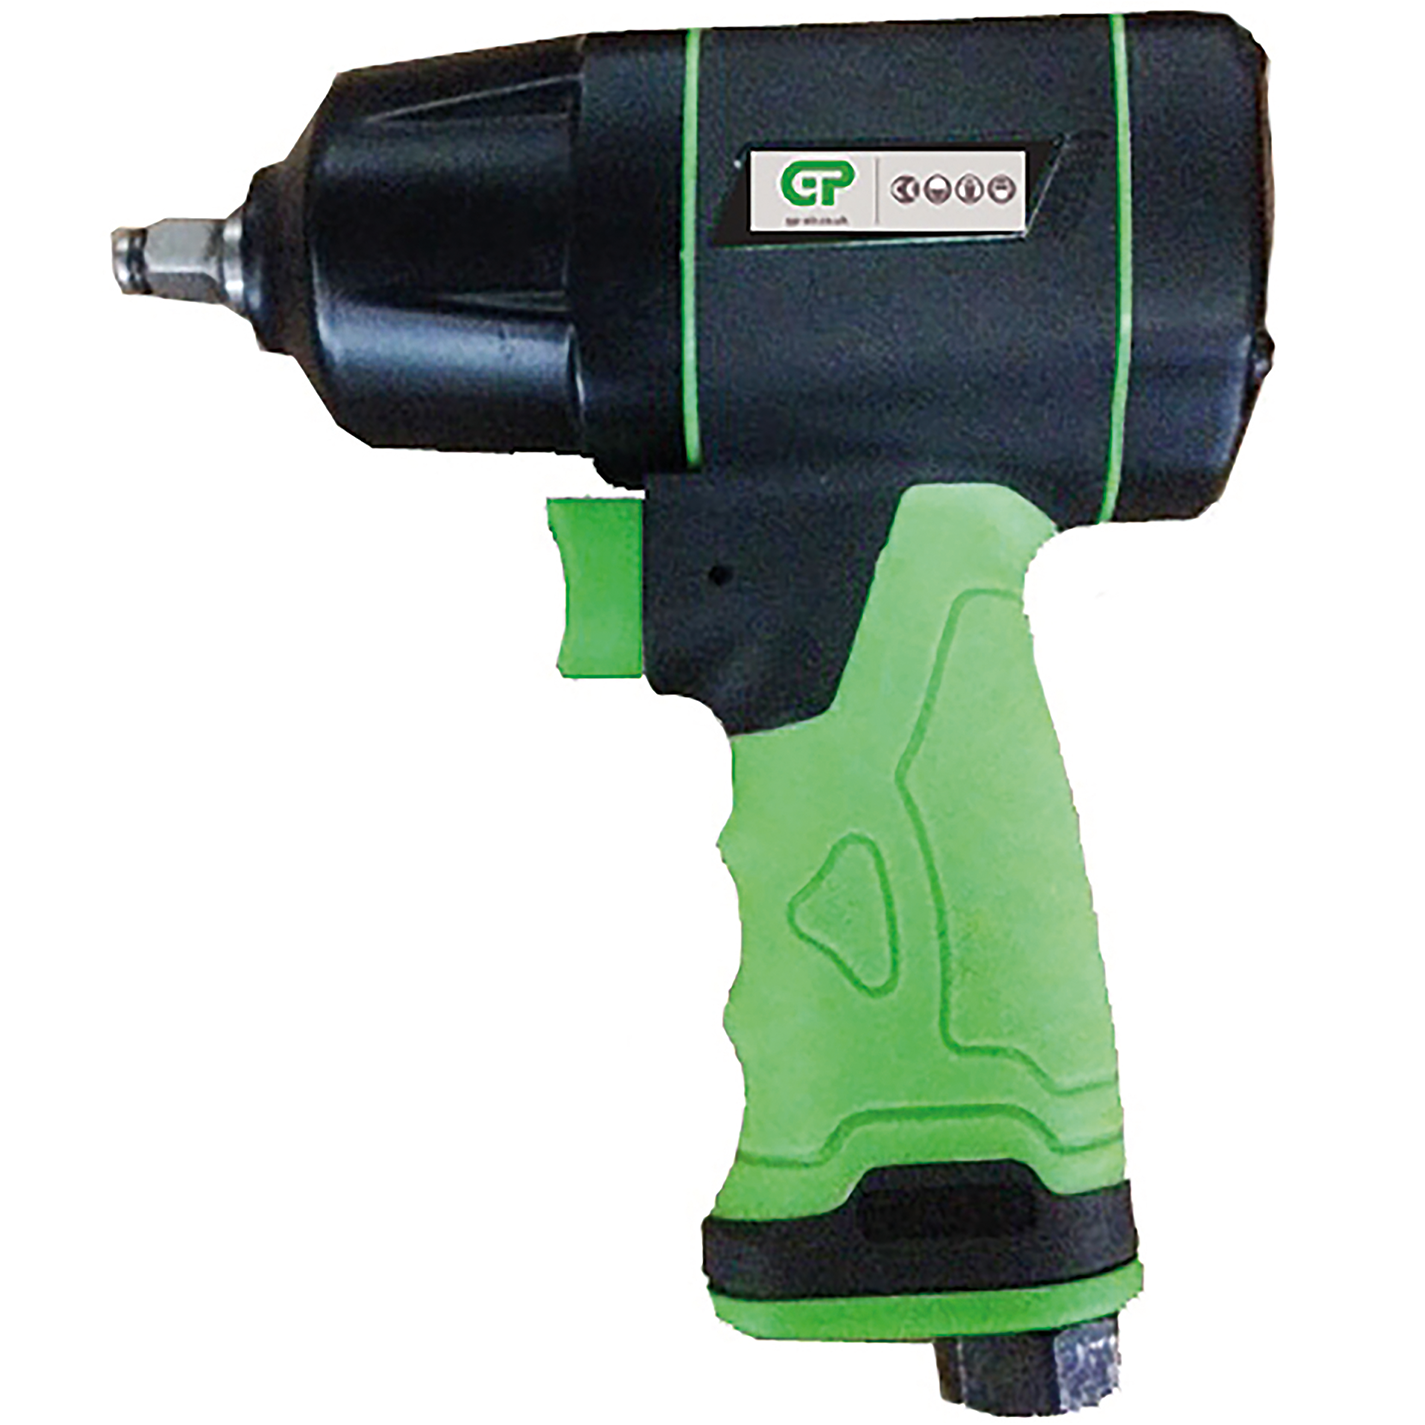 3/8" Twin Hammer Impact Wrench